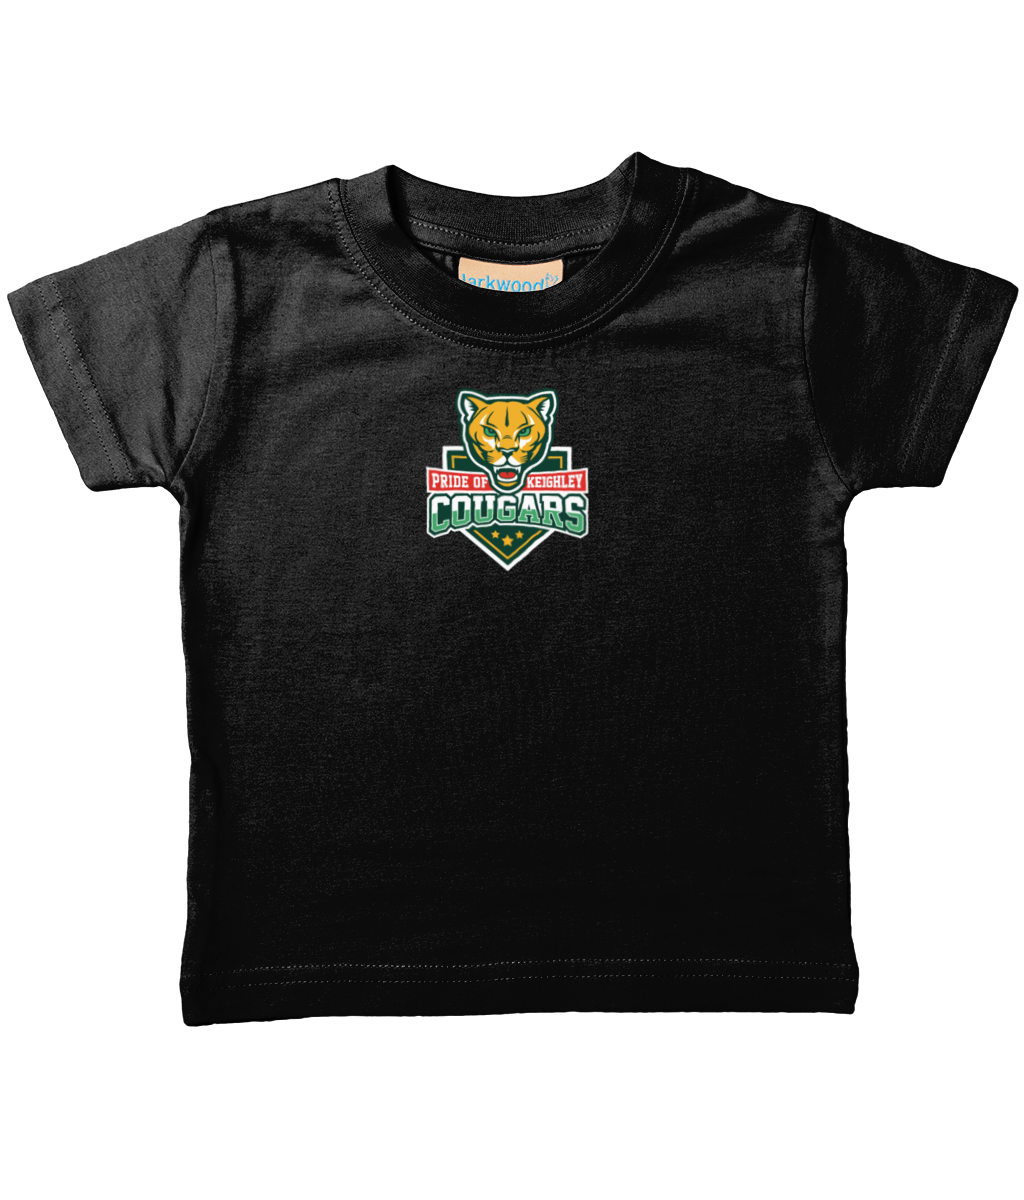 Keighley Cougars Baby/Toddler Crest T-Shirt in Black